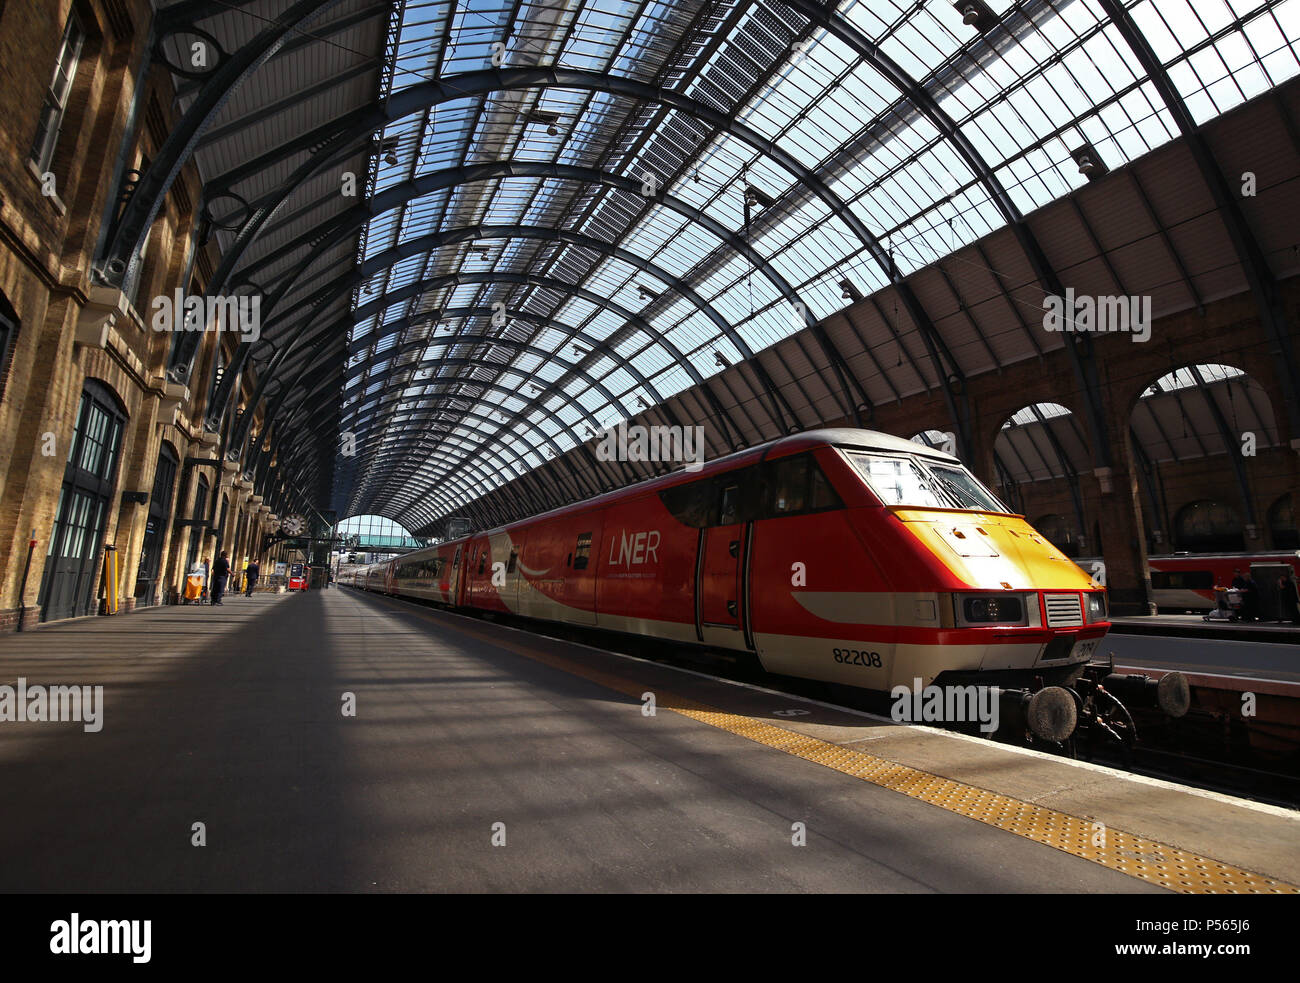 A London North Eastern Railway (LNER) train arrives at a platform during the launch event for the new service, which replaces failed rail franchise Virgin Trains East Coast (VTEC), at Kings Cross station in London. Stock Photo